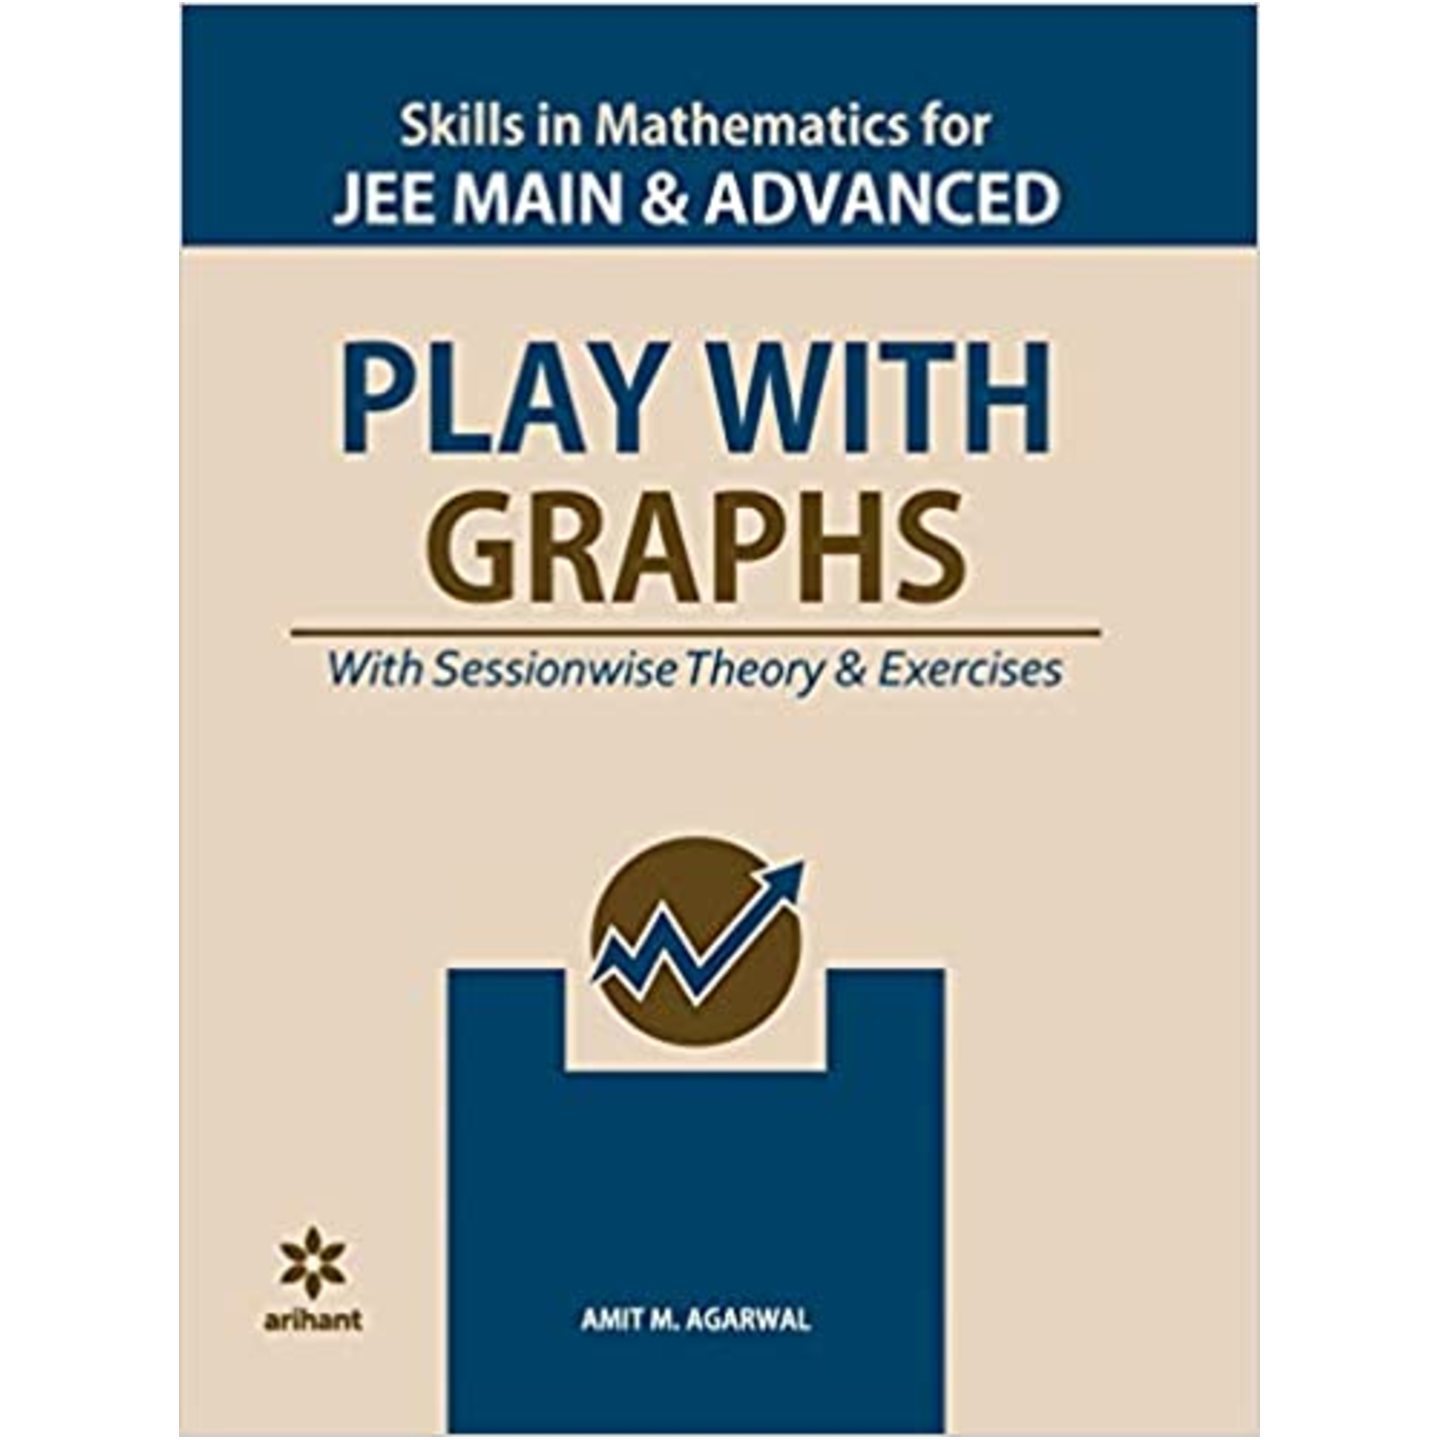 ARIHANT Skills in Mathematics - Play with Graphs for JEE Main and Advanced AMIT M AGARWAL